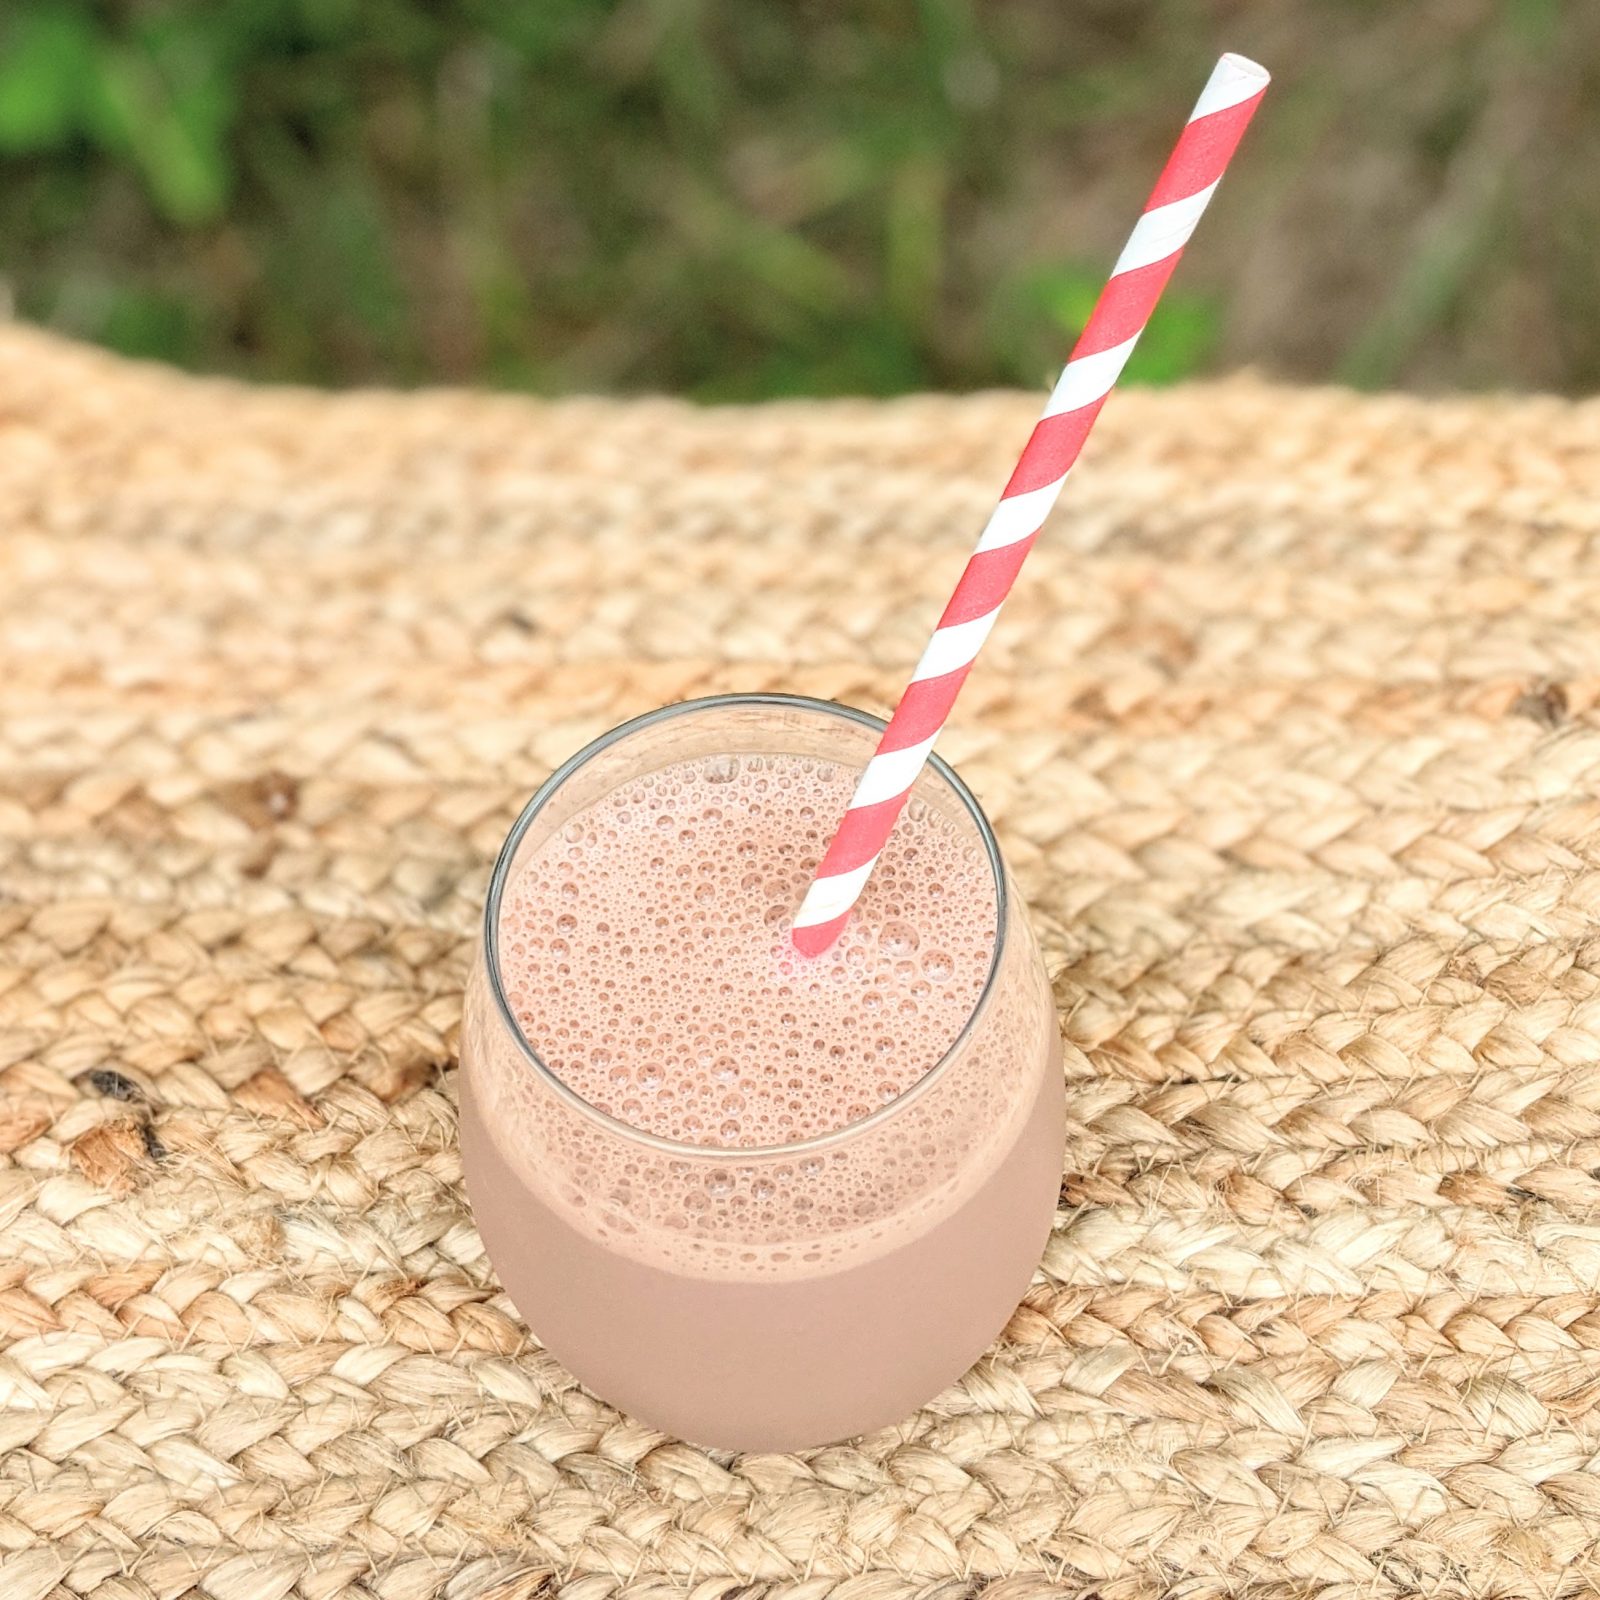 glass of chocolate milk with red and white straw